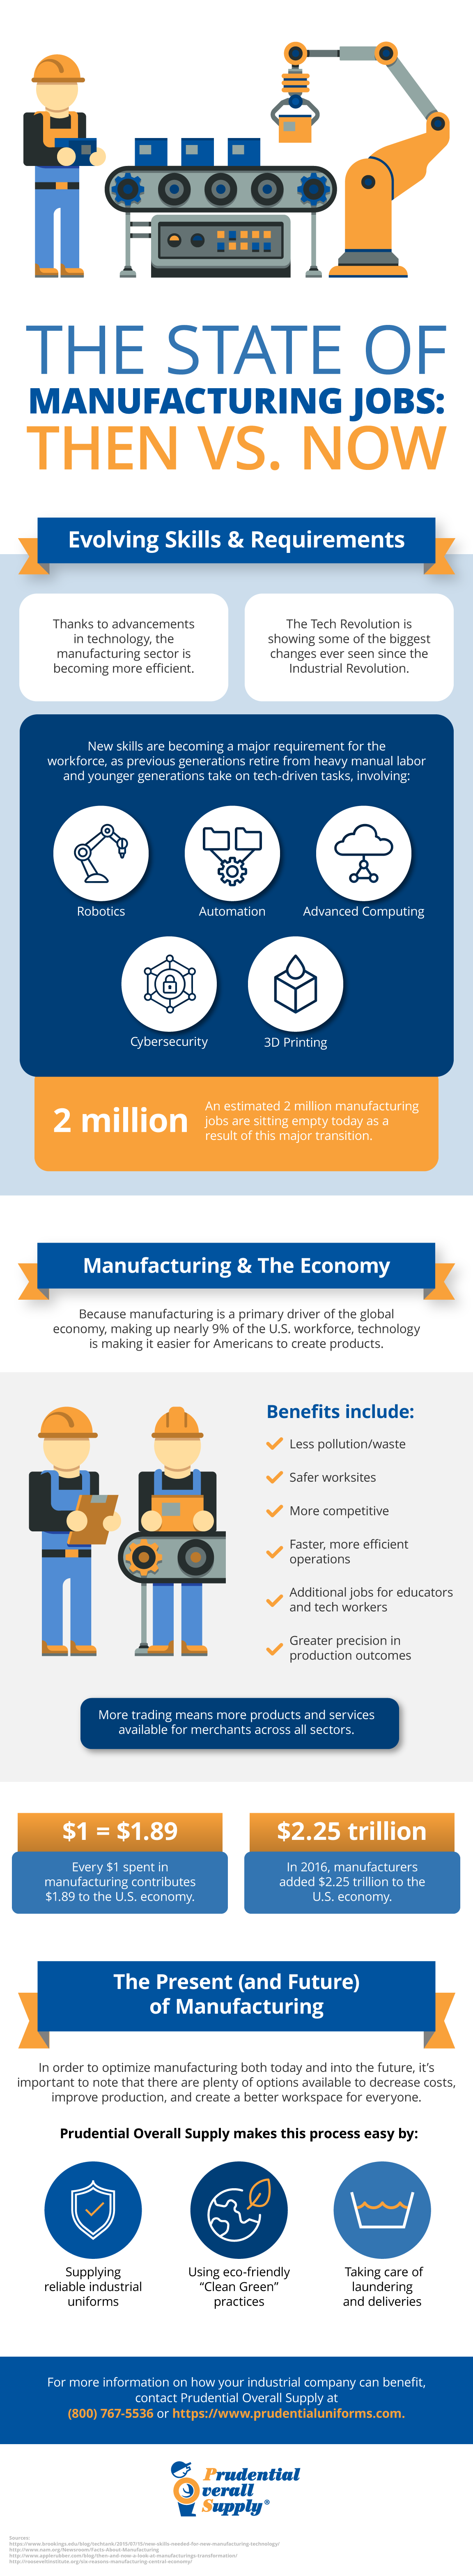 The State of Manufacturing Jobs Infographic